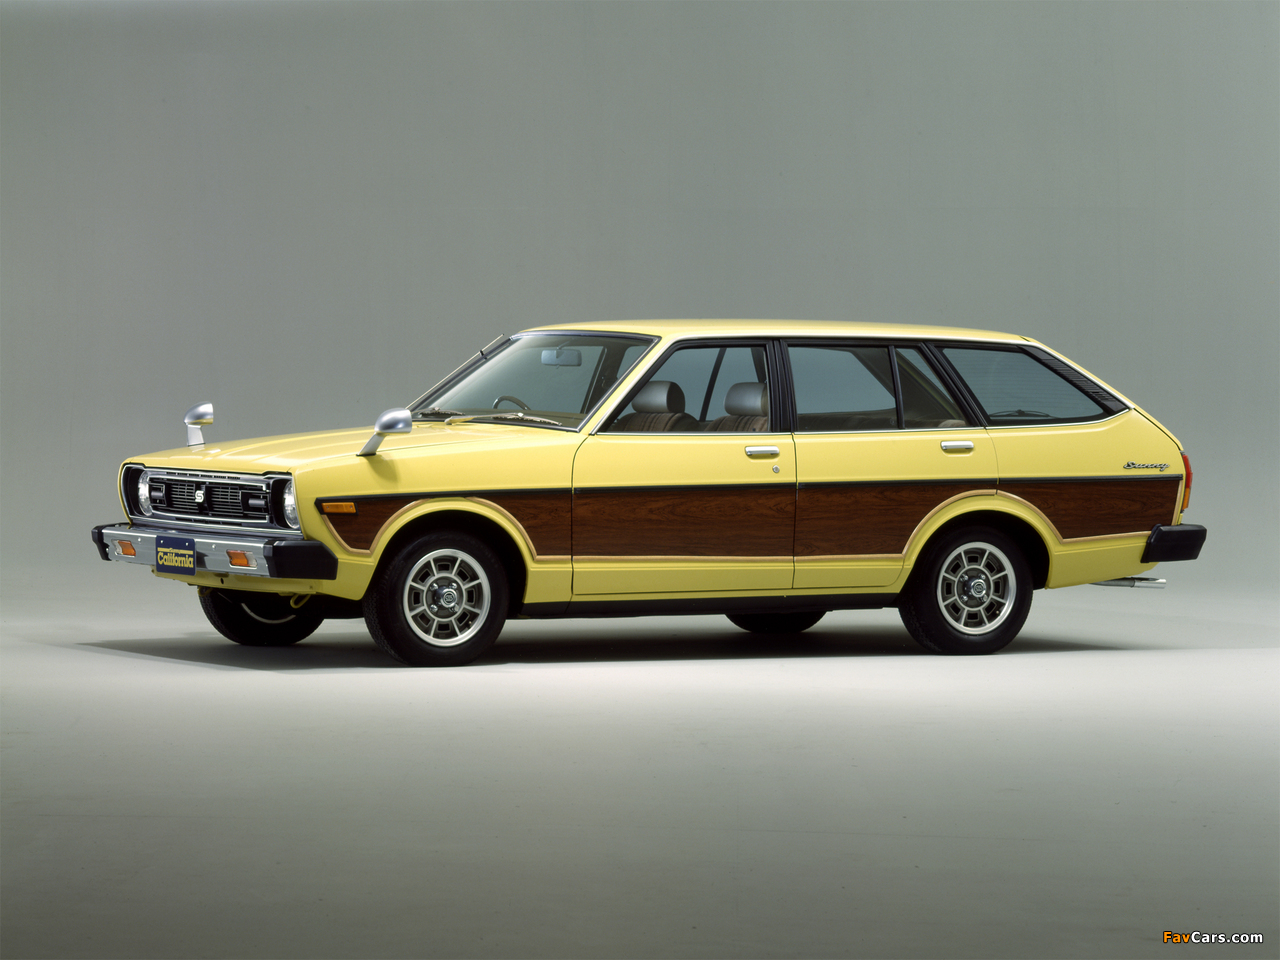 Images of Nissan Sunny California (B 310) 1979 (1280 x 960)